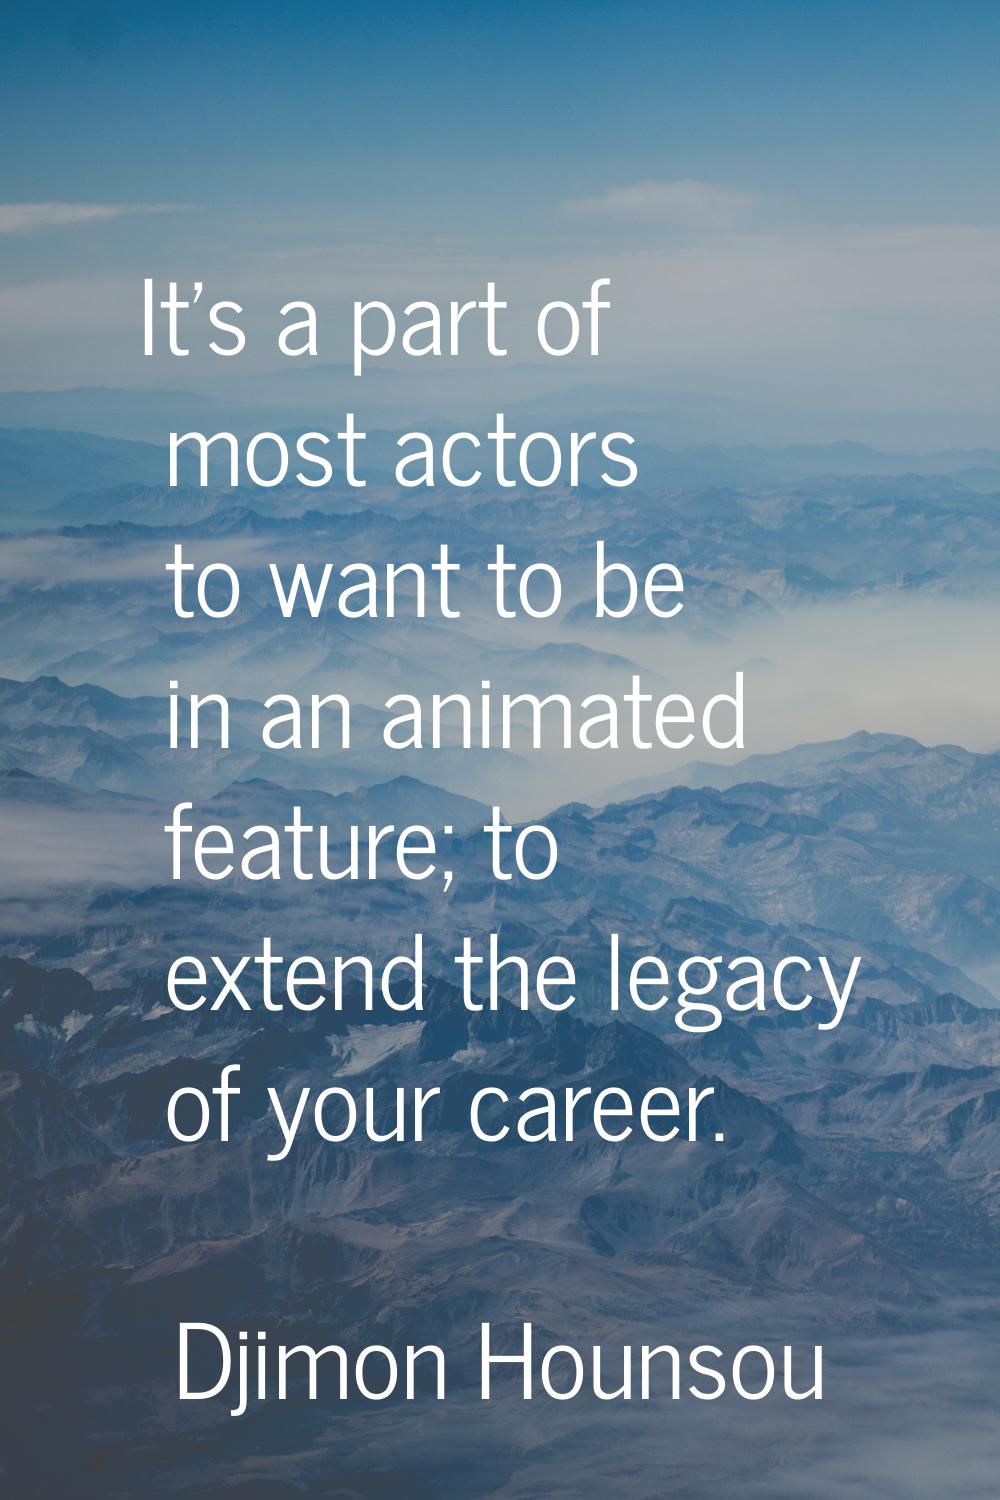 It's a part of most actors to want to be in an animated feature; to extend the legacy of your caree